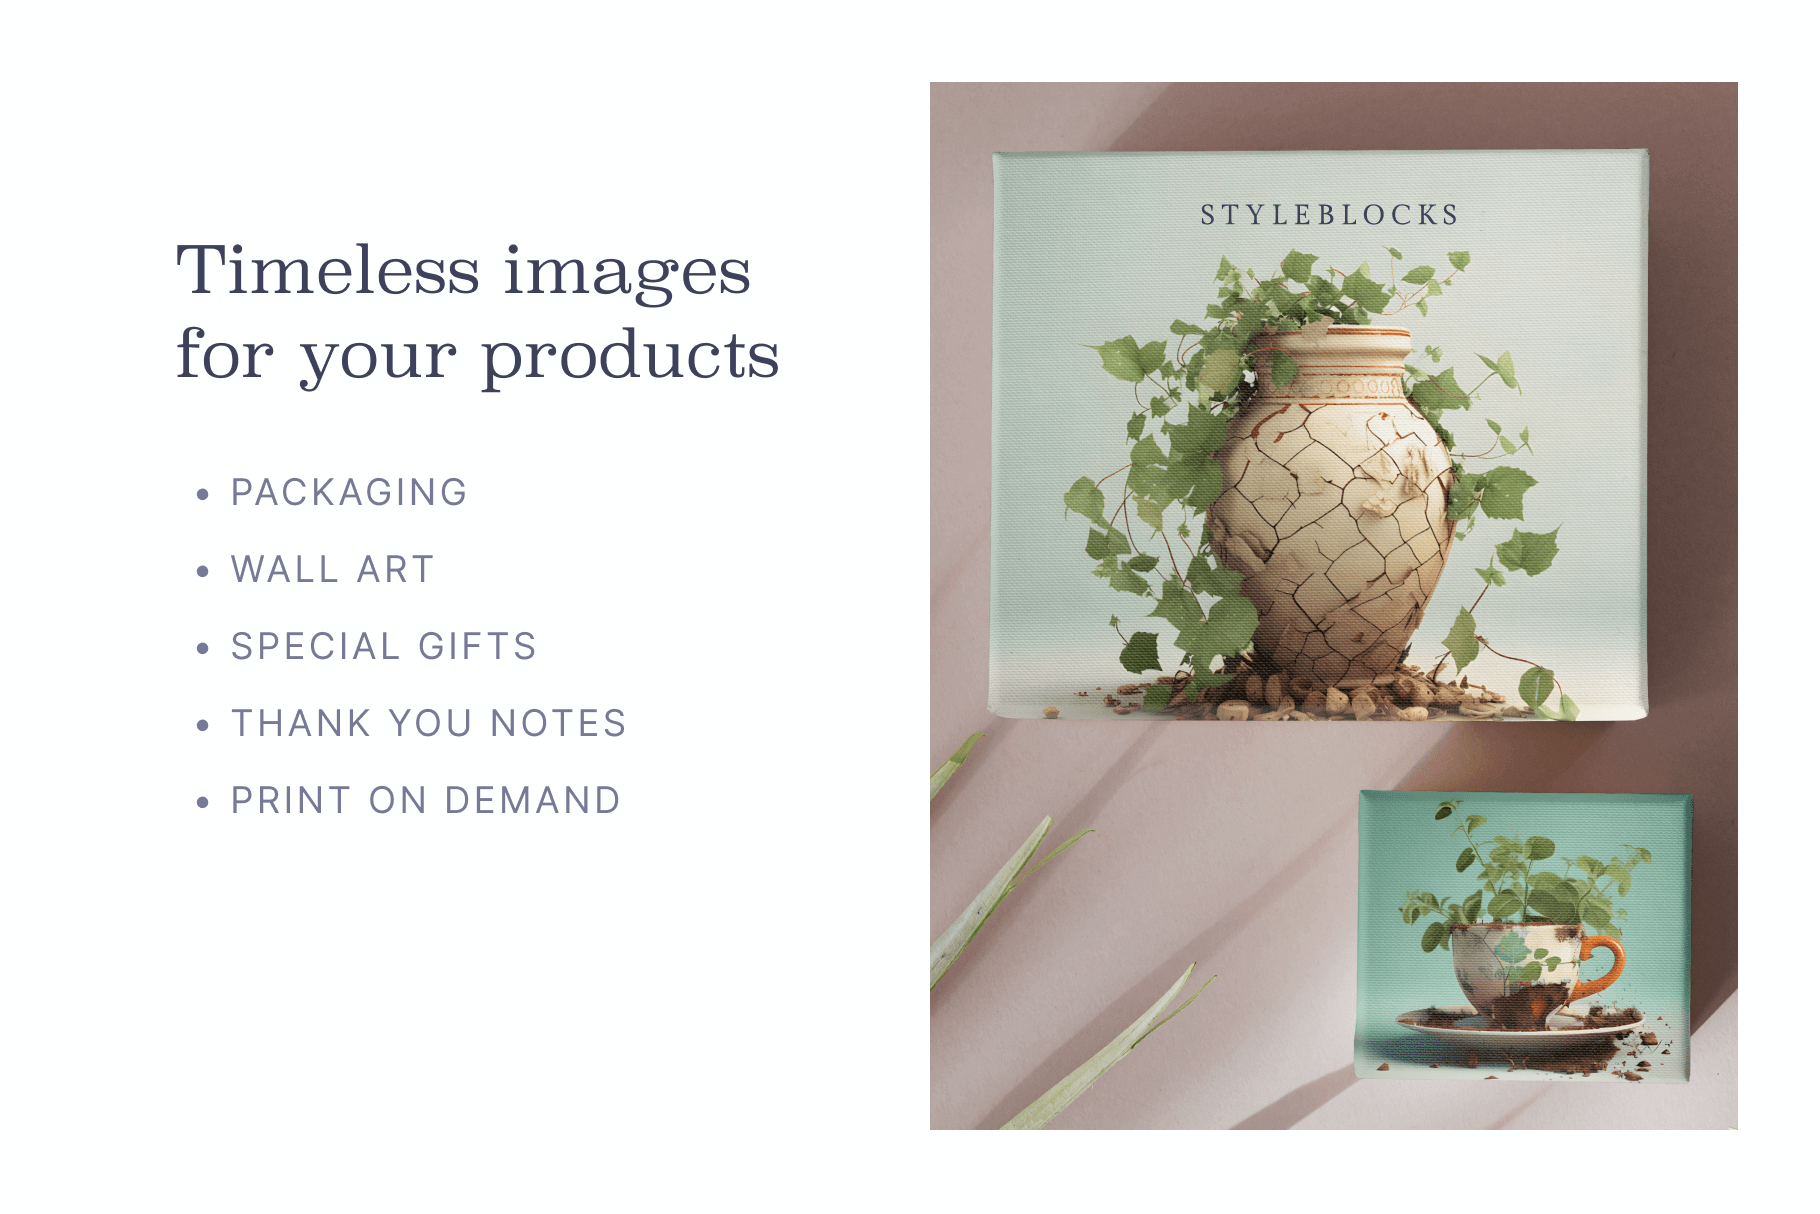 Packaging of antique objects with ivy elements